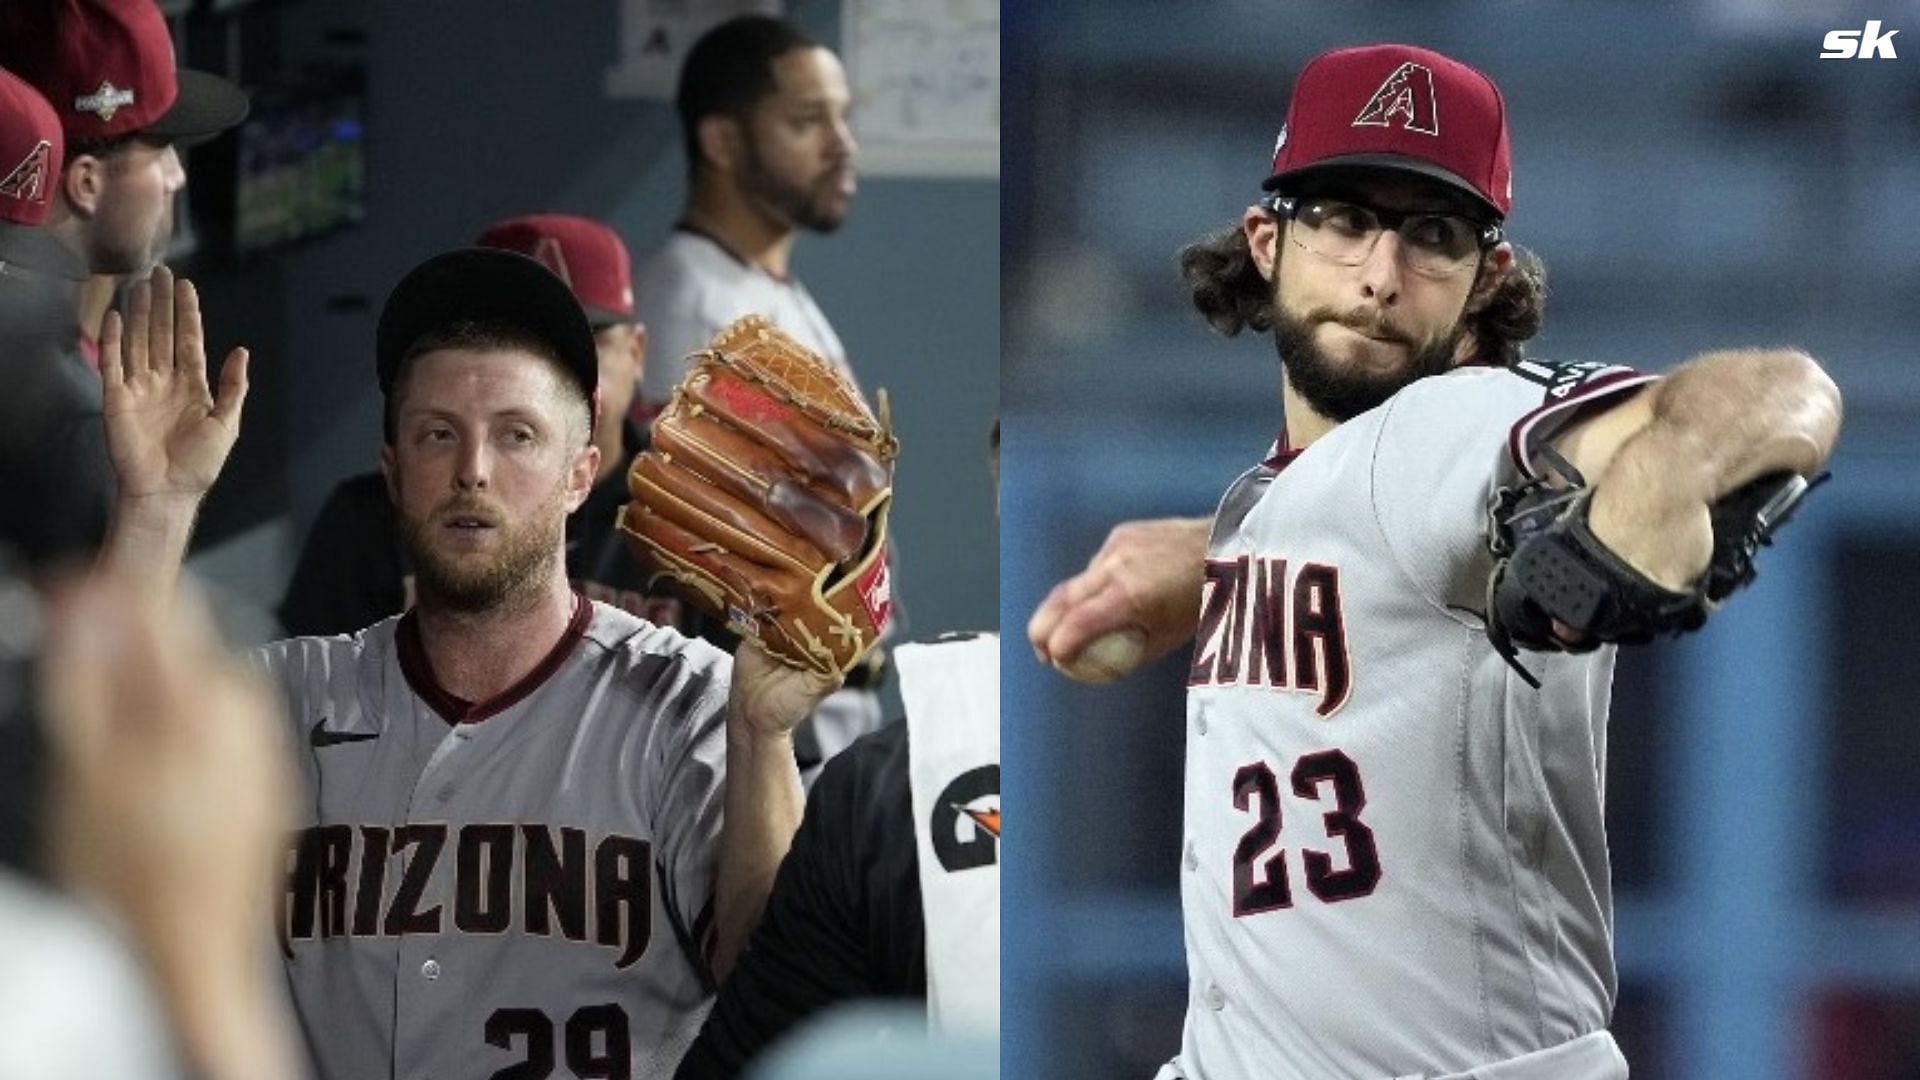 Phillies fans certain about team's victory in NLCS as Diamondbacks announce  starting pitchers for first 3 games